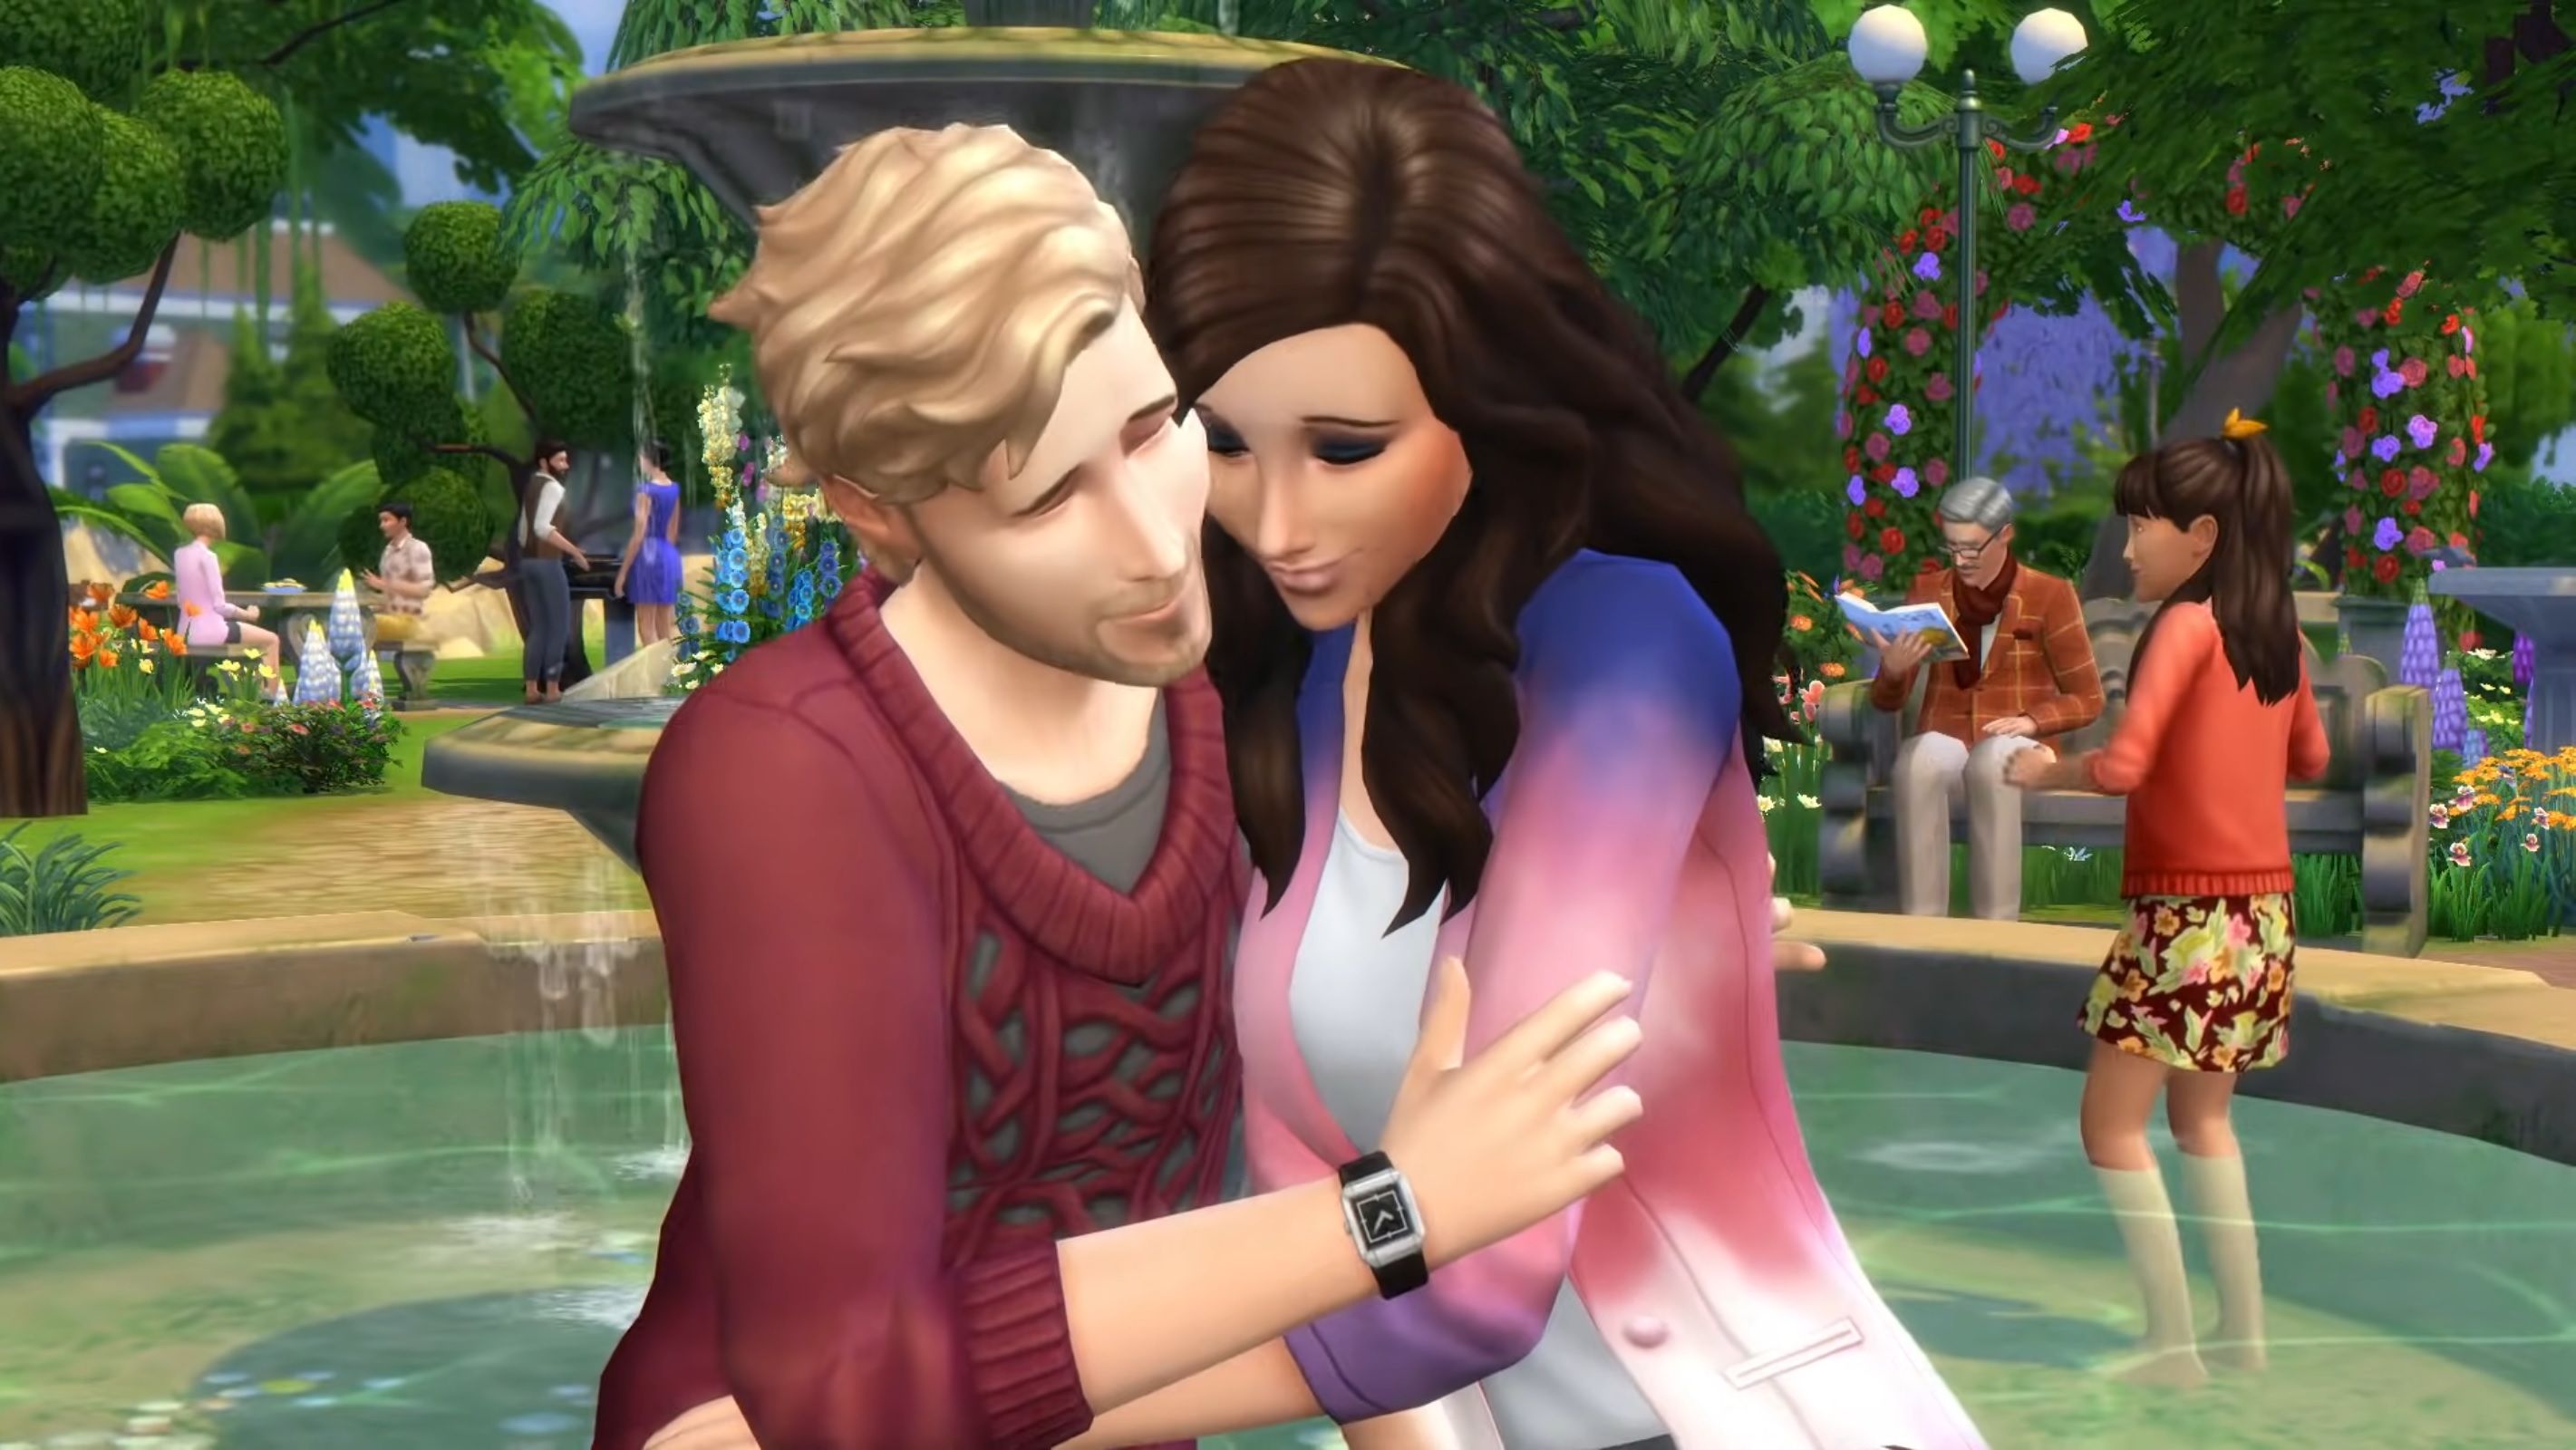 higher ground | Sims 4 couple poses, Sims 4, Sims 4 children